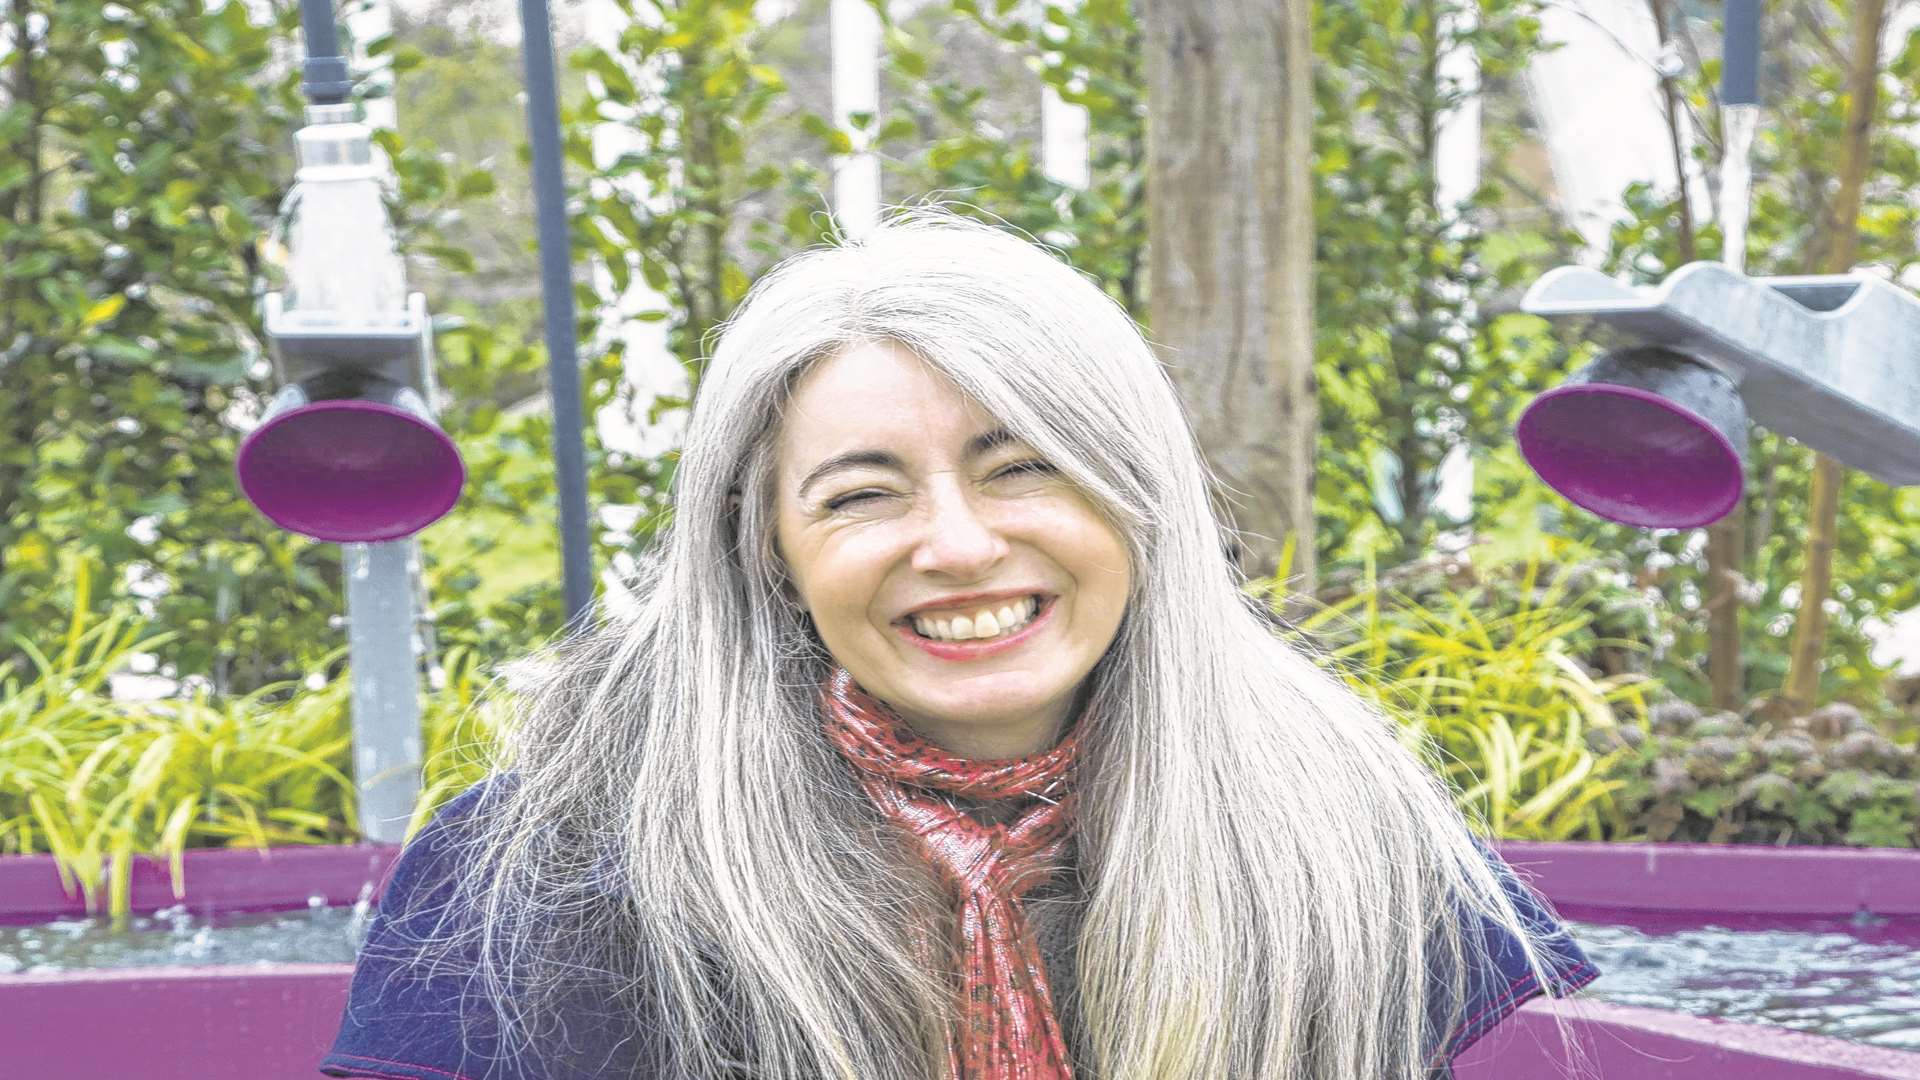 Dame Evelyn Glennie has filmed a special performance for the concert in Maidstone